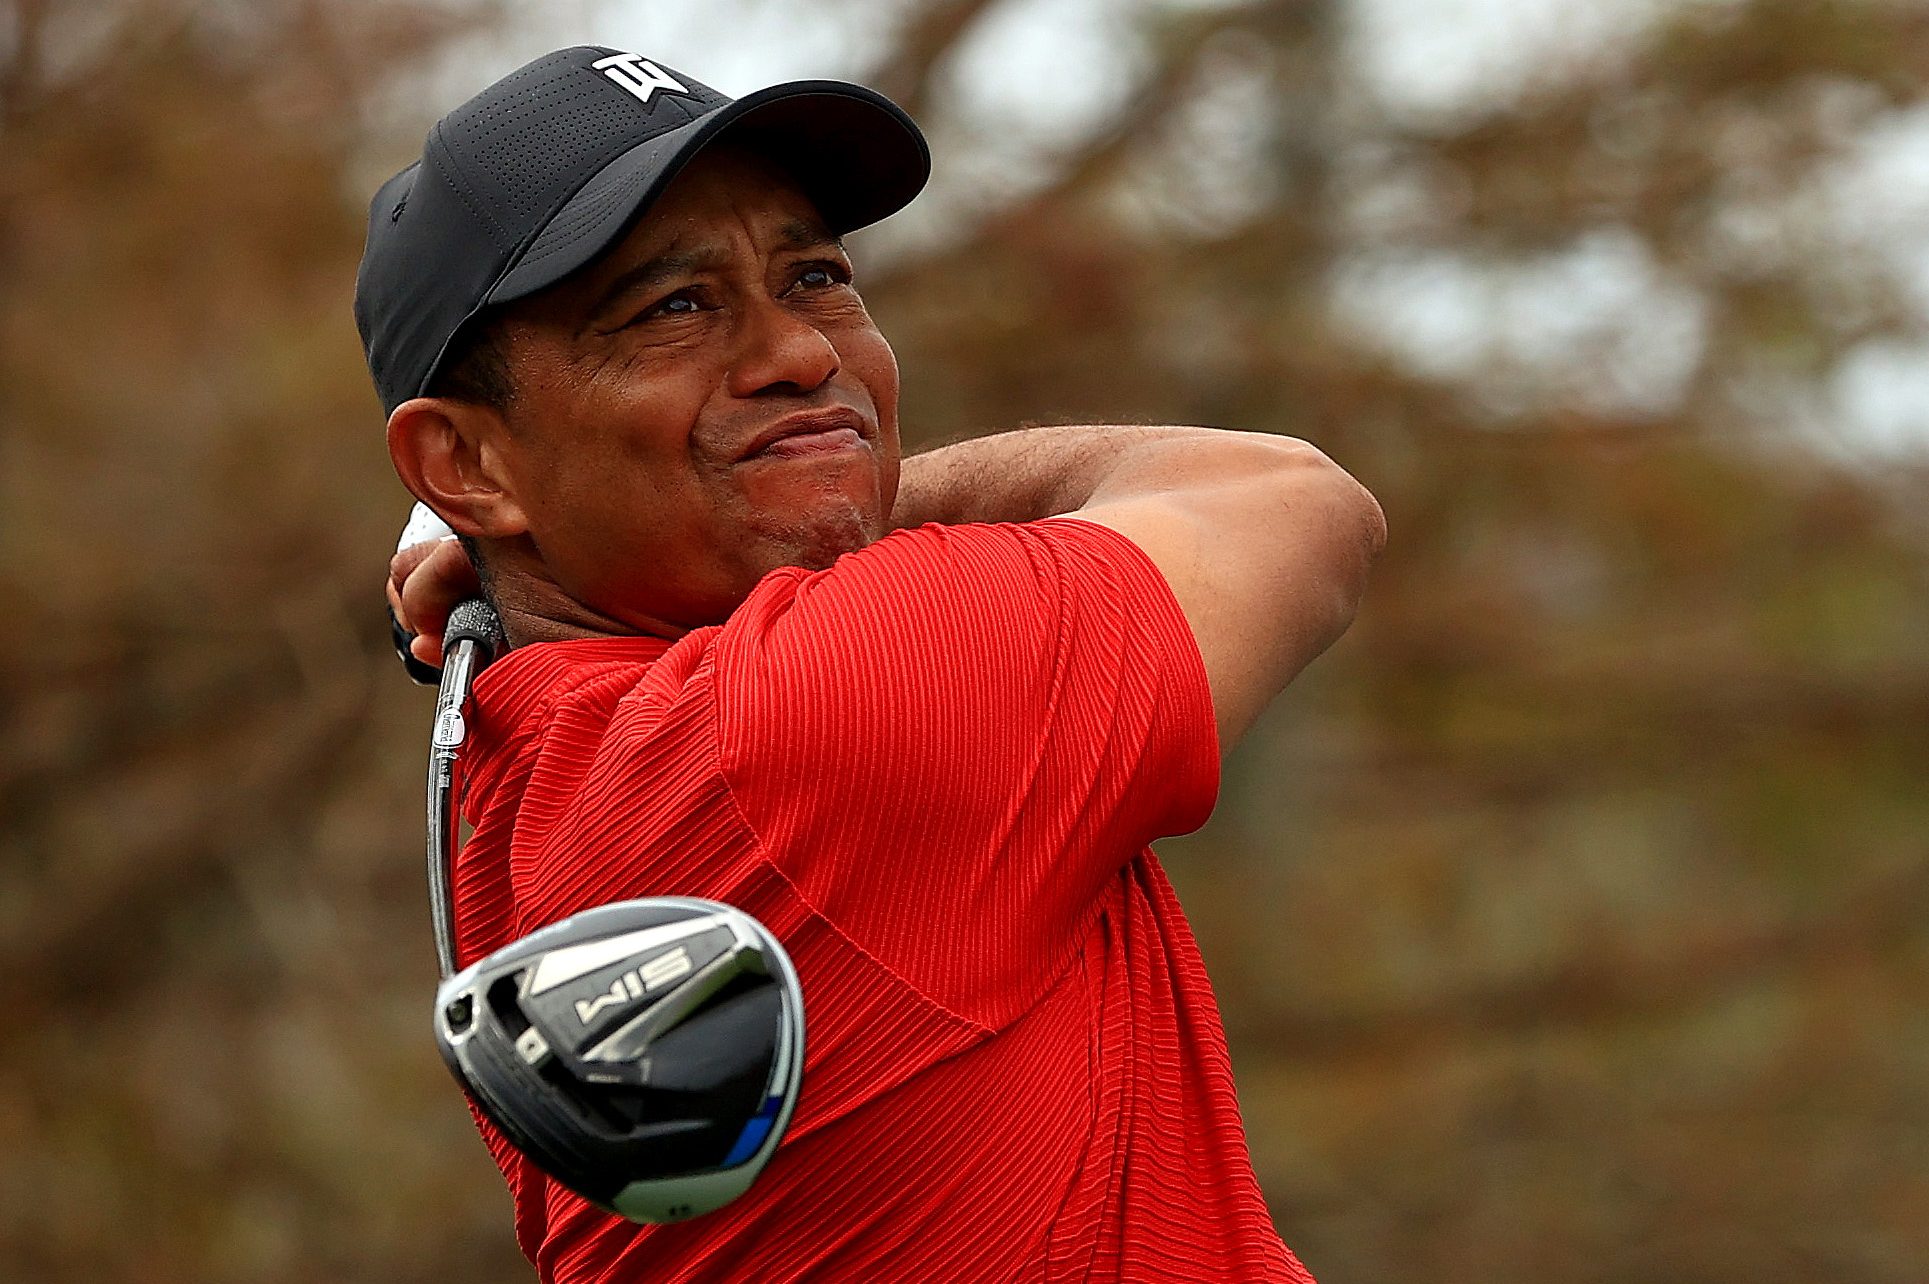 Tiger Woods Reveals His Focus in Rehab Is Walking Without Help, Not Returning to Golf